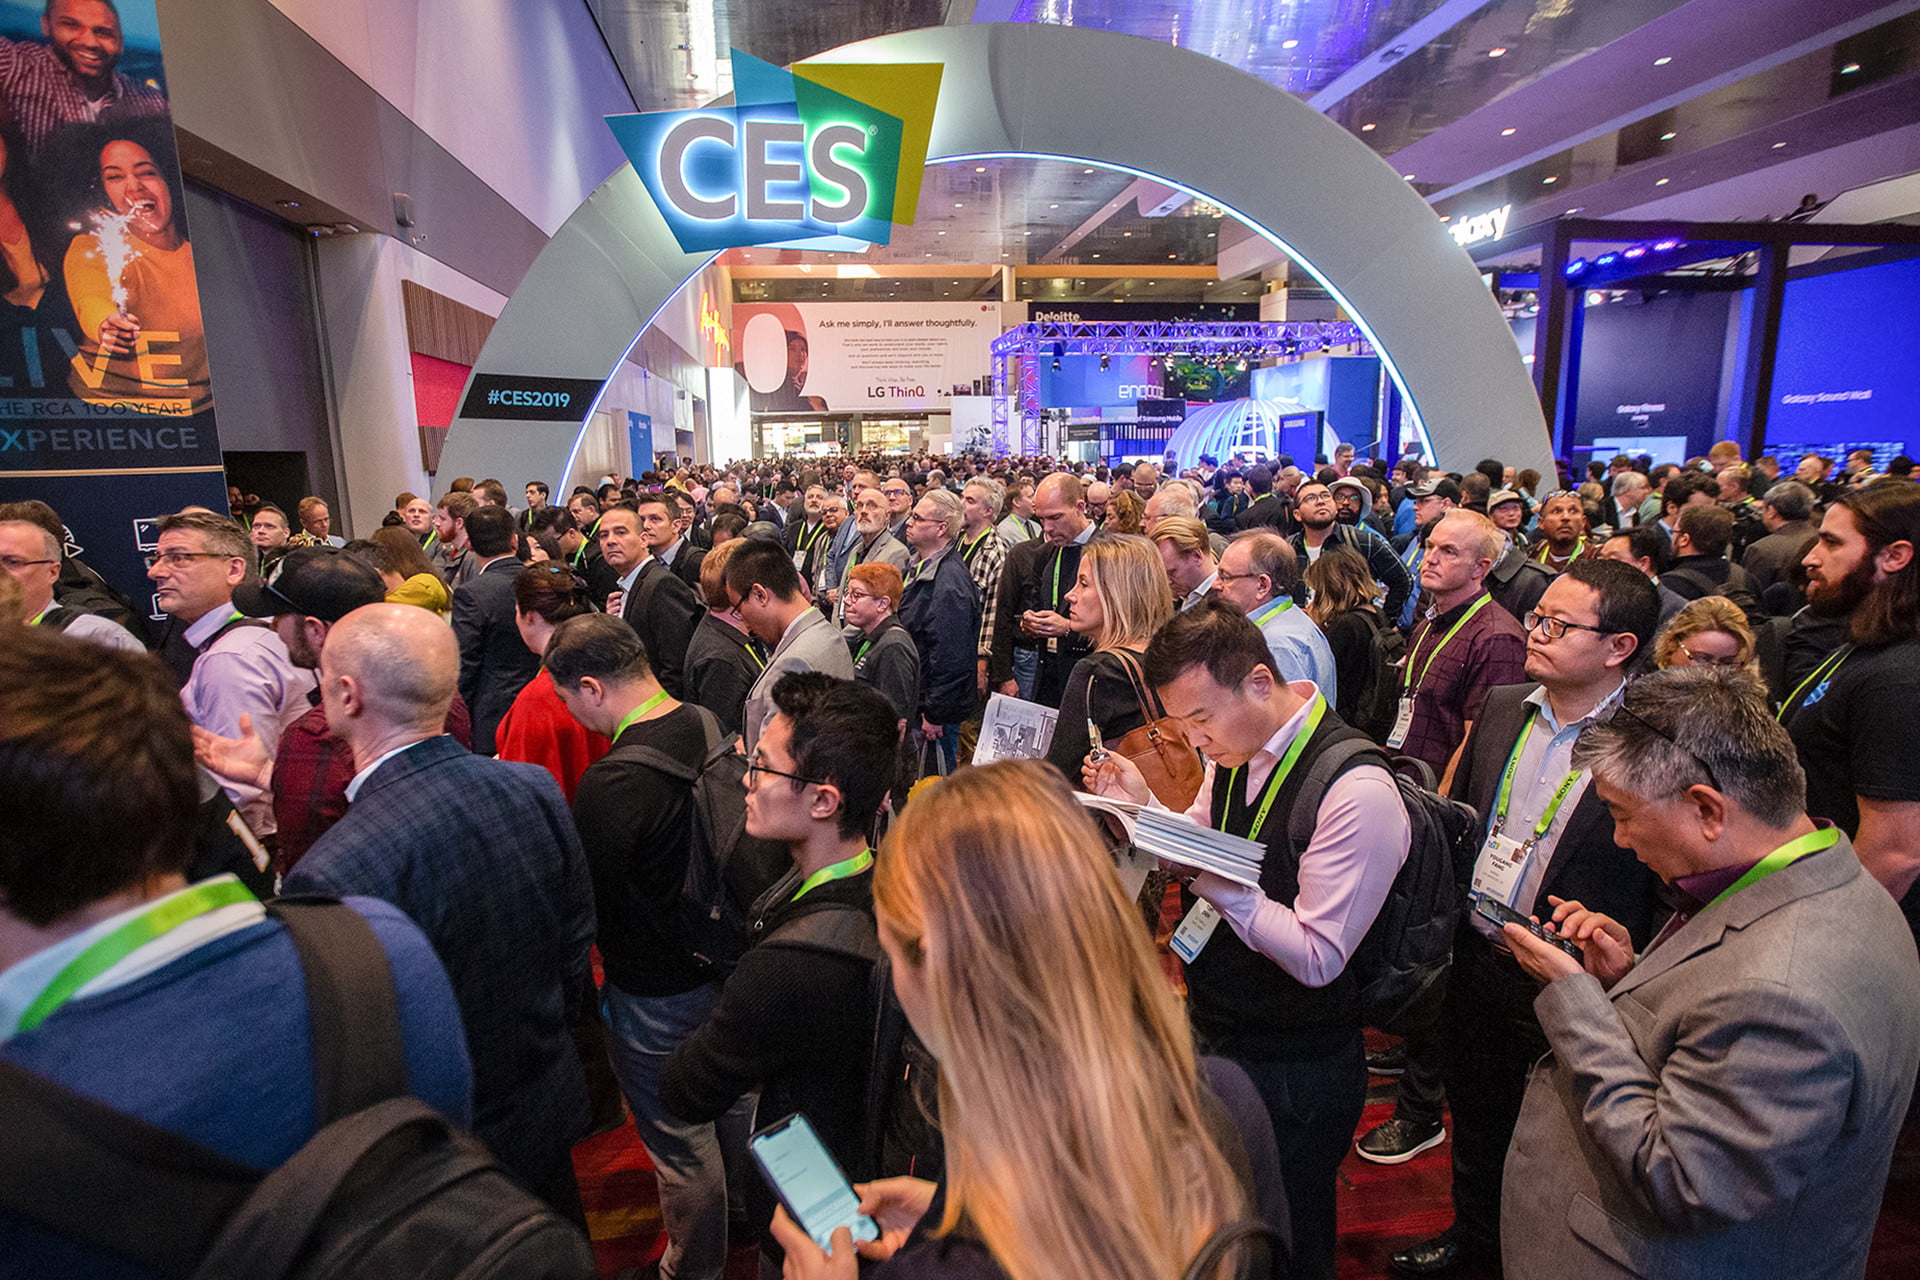 The International CES Conference is Going Digital